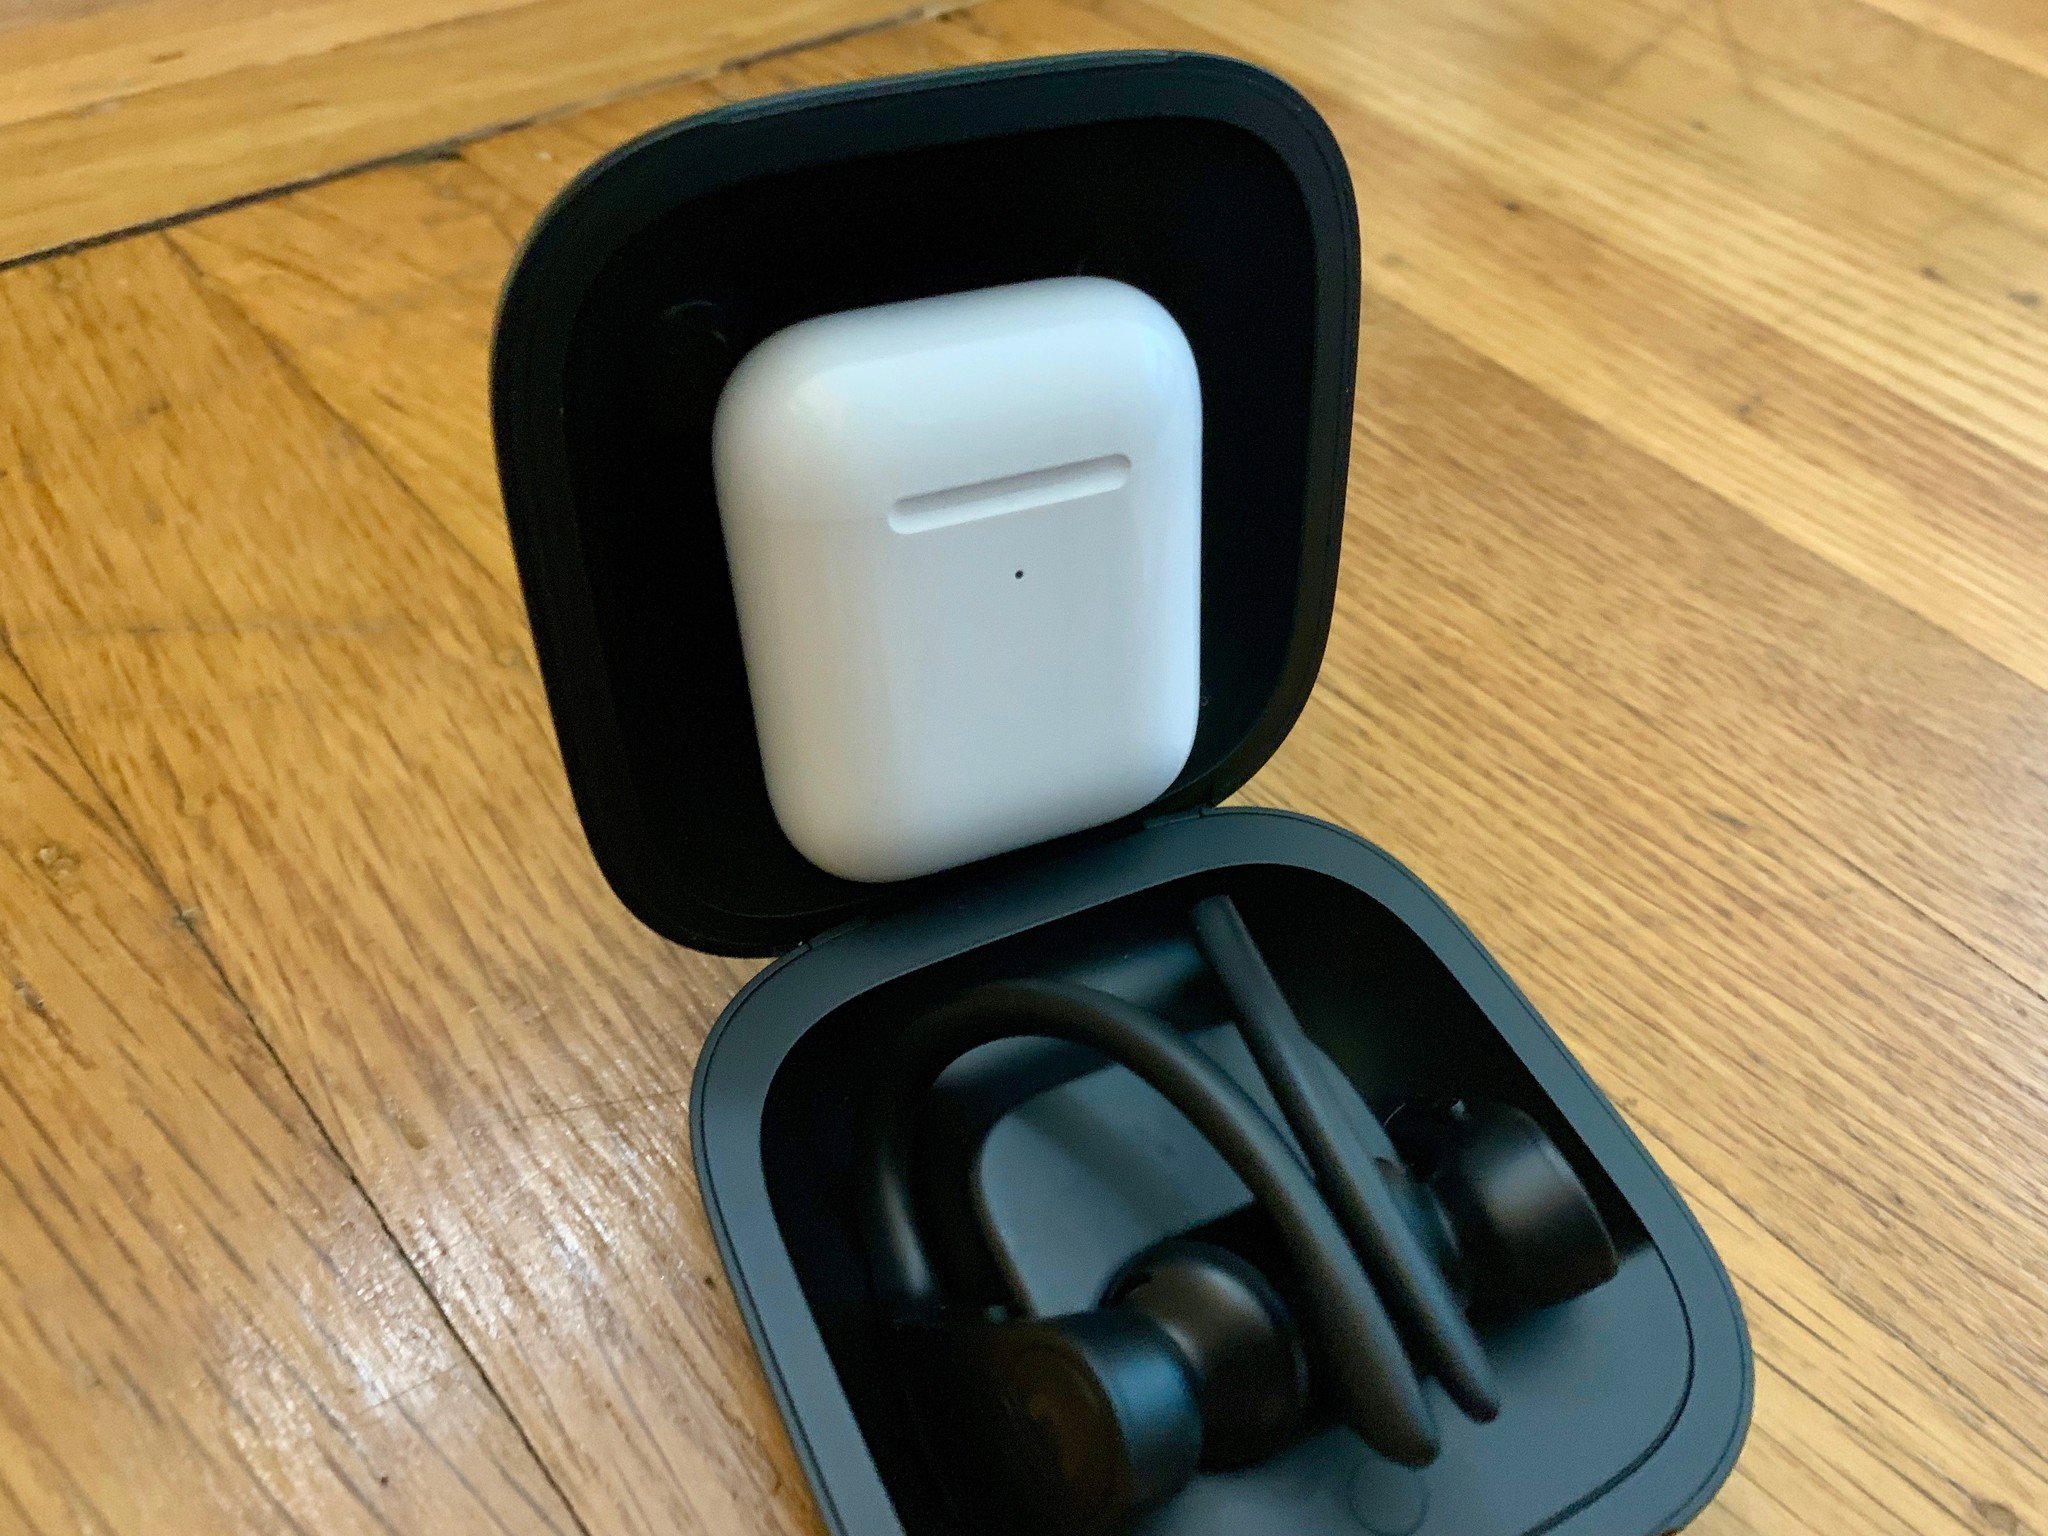 Powerbeats Pro case with Airpods case inside